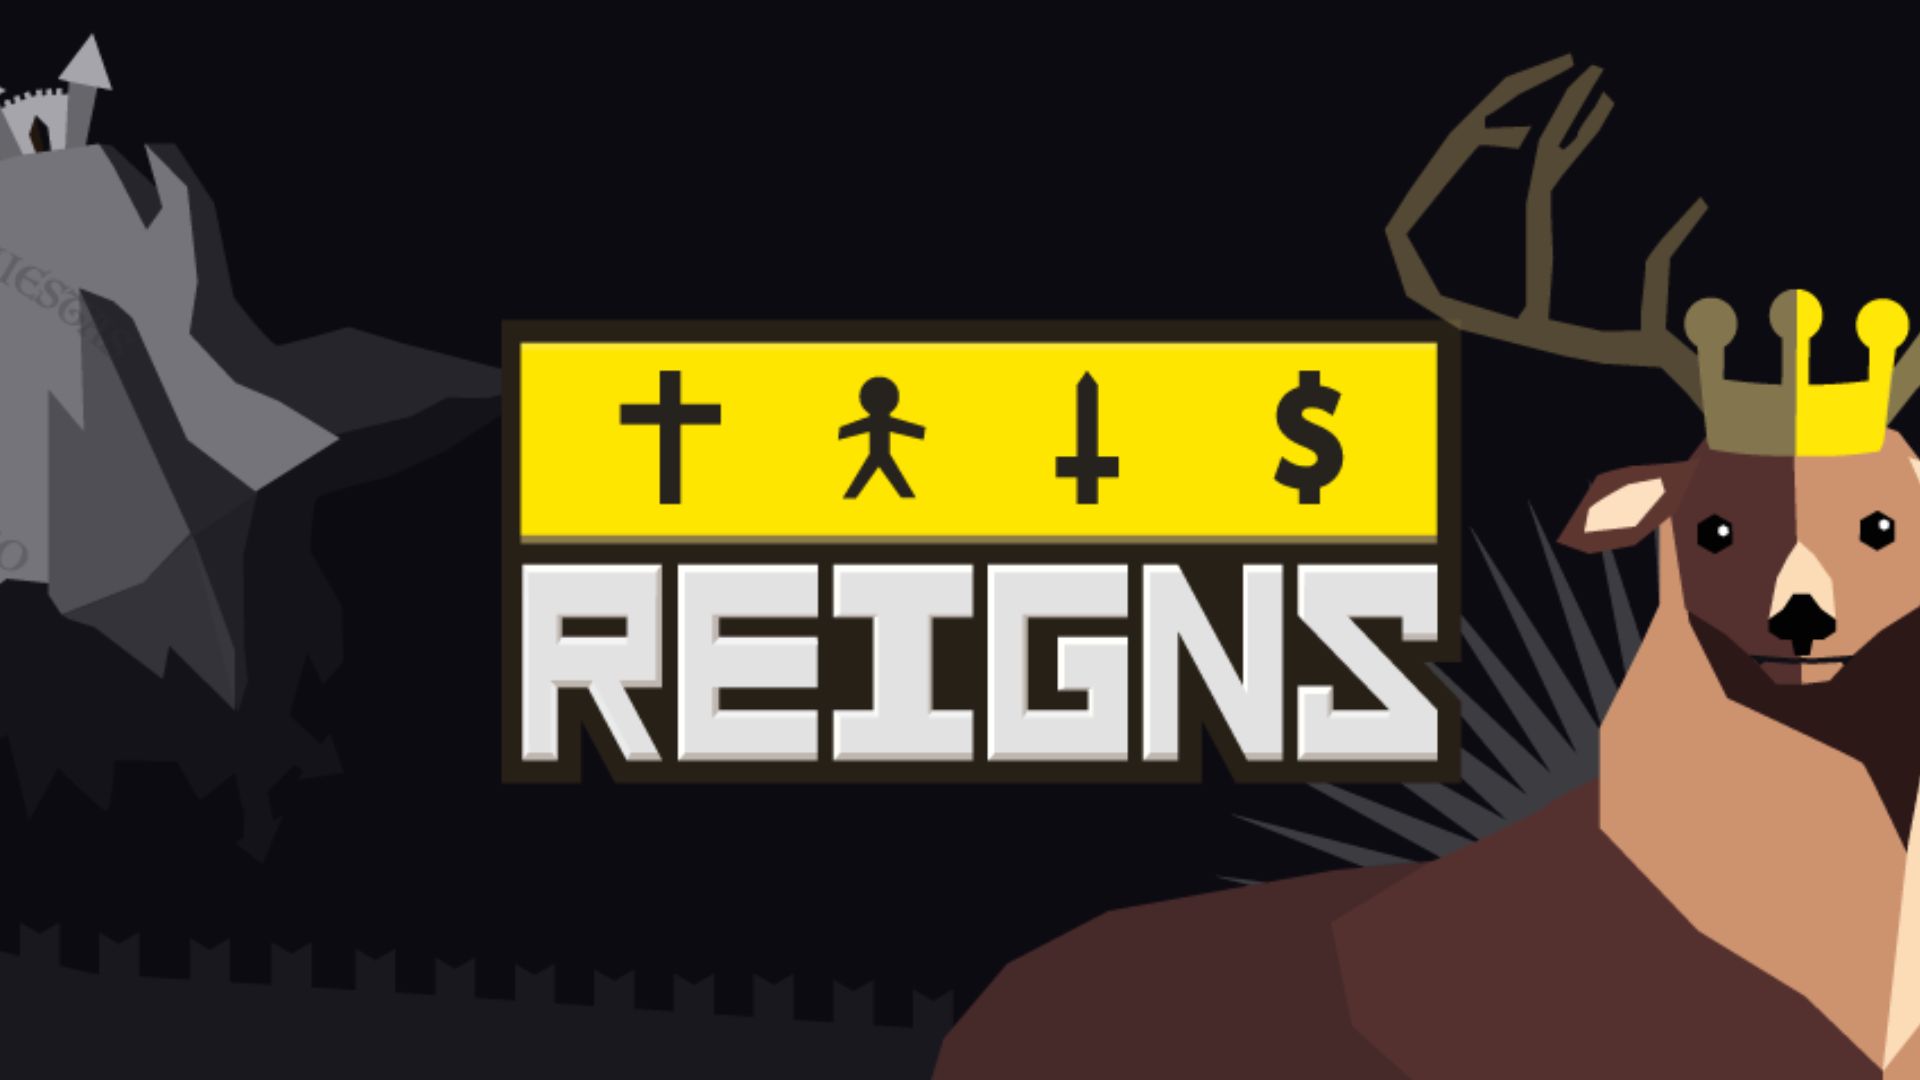 Best history games: Reigns. Image shows the game's logo as well as a deer wearing a crown and a castle.